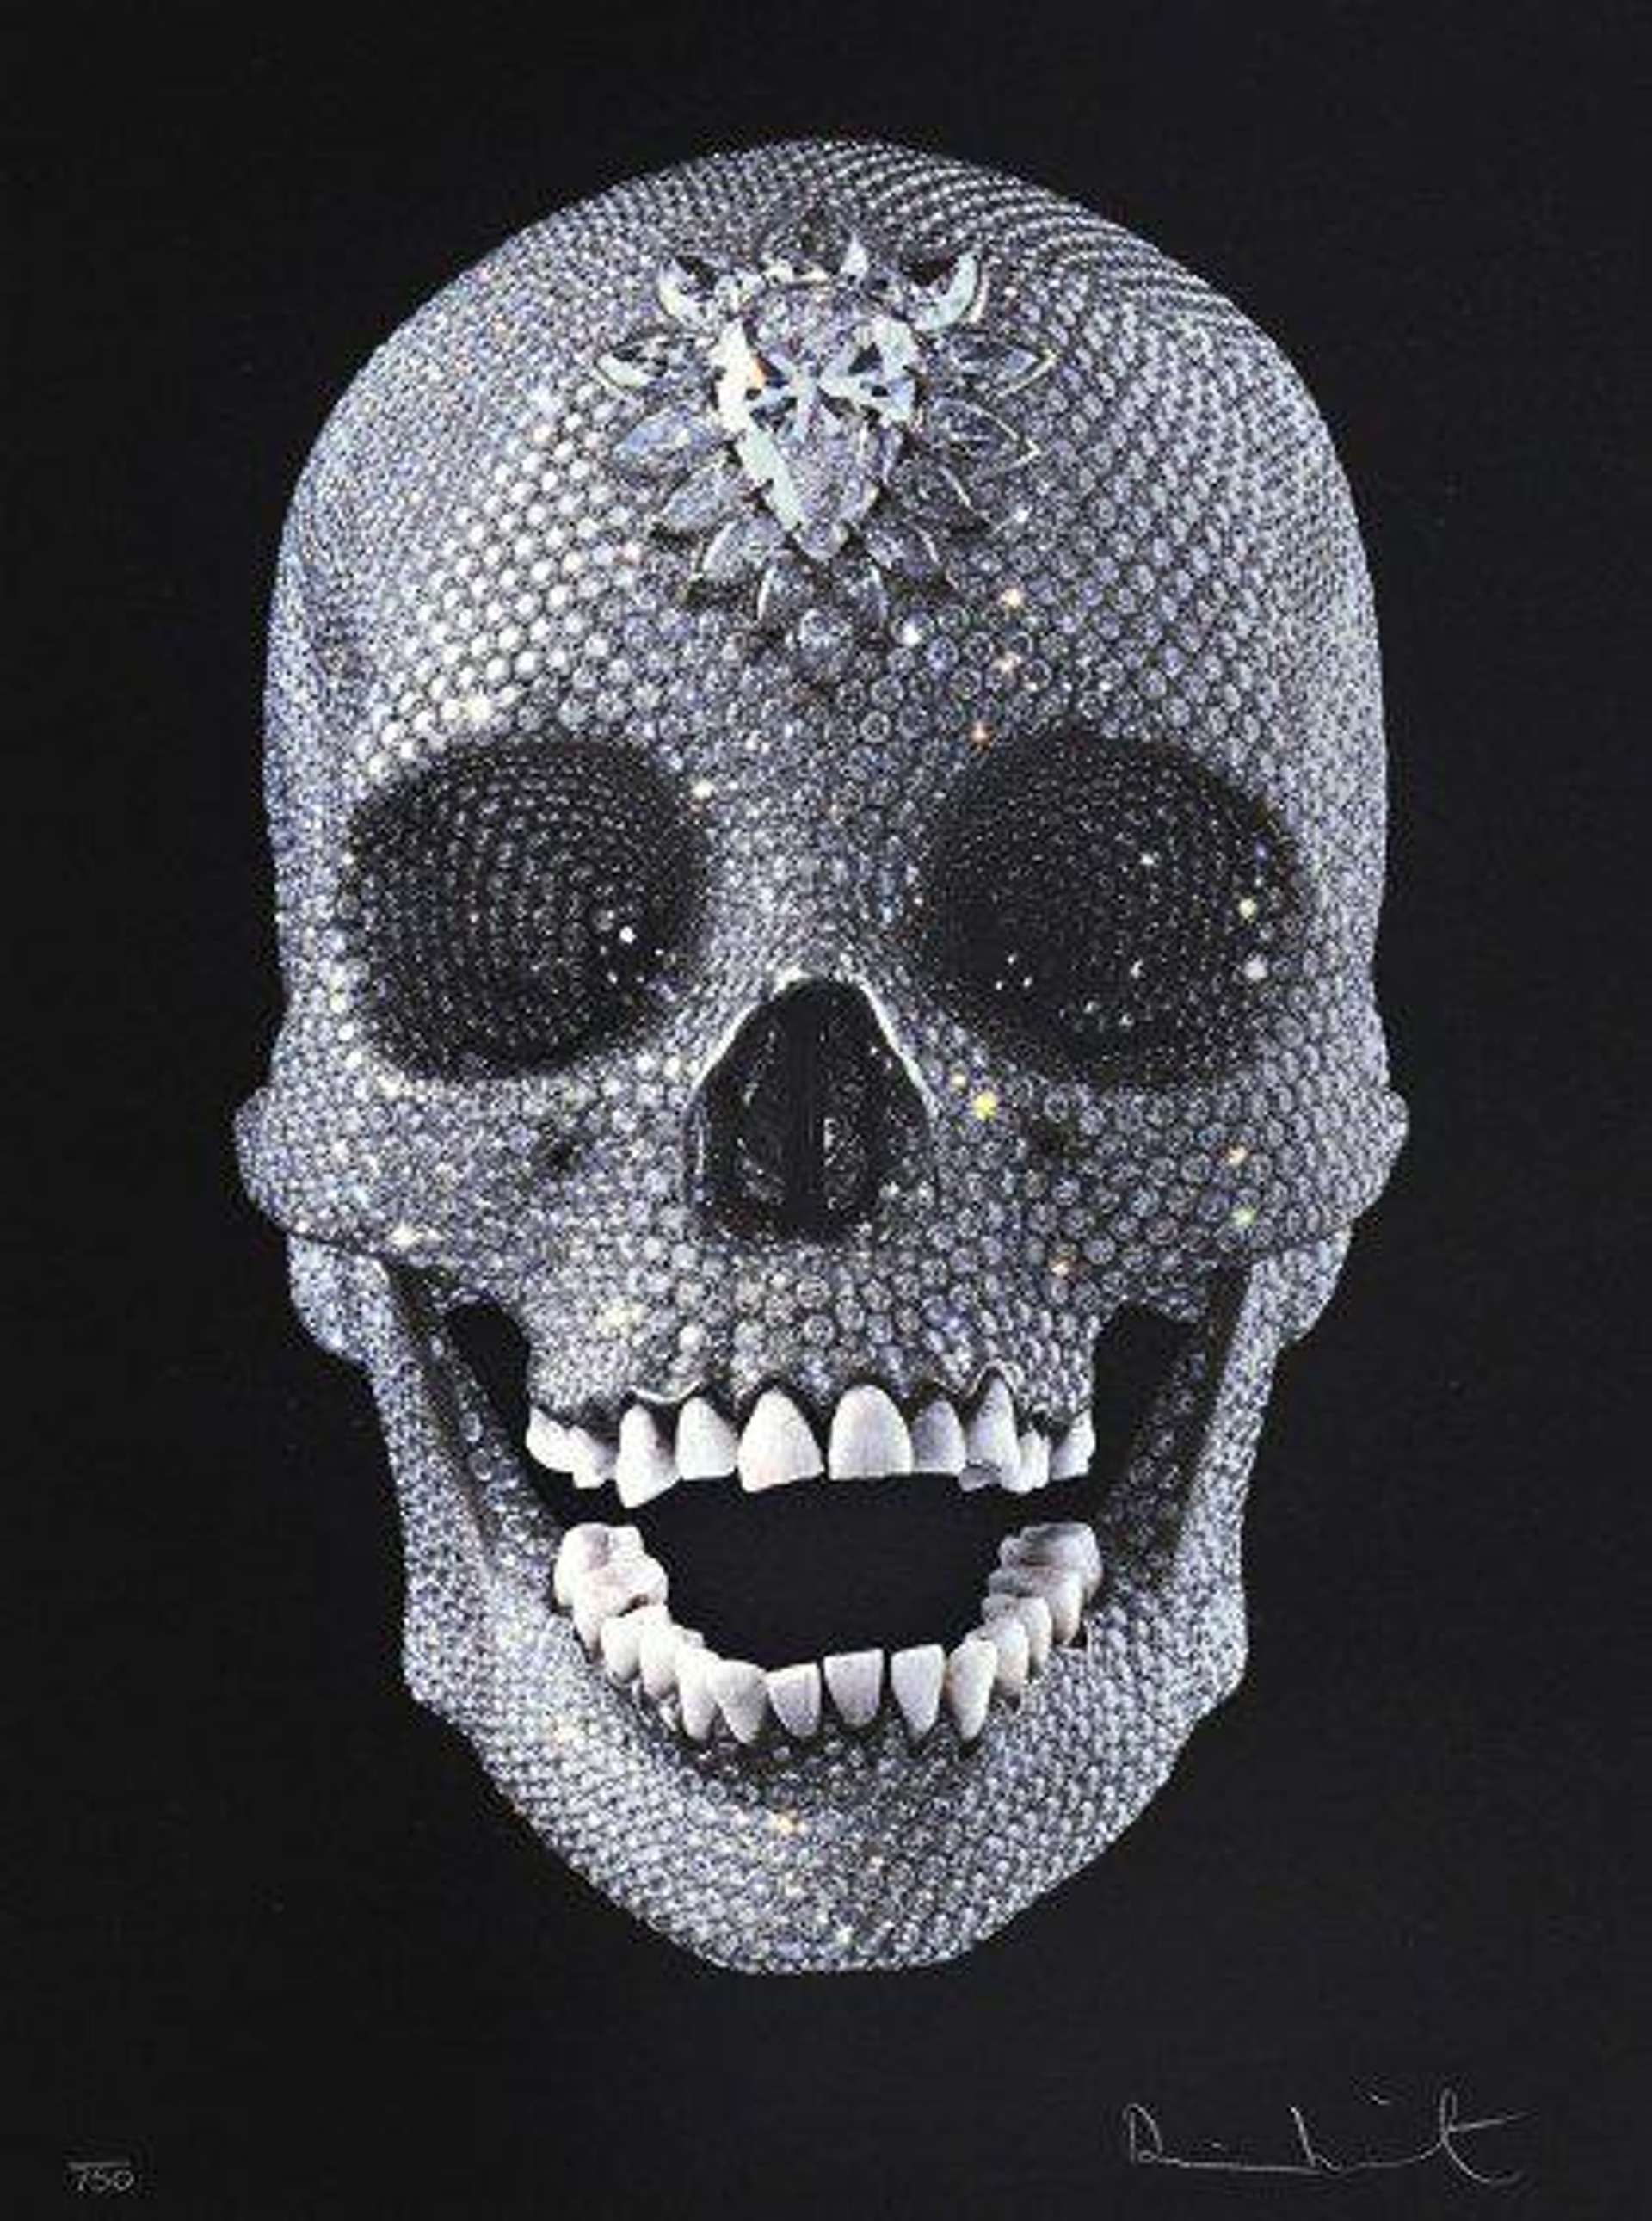 Close up of a human skull encrusted with thousands of diamonds